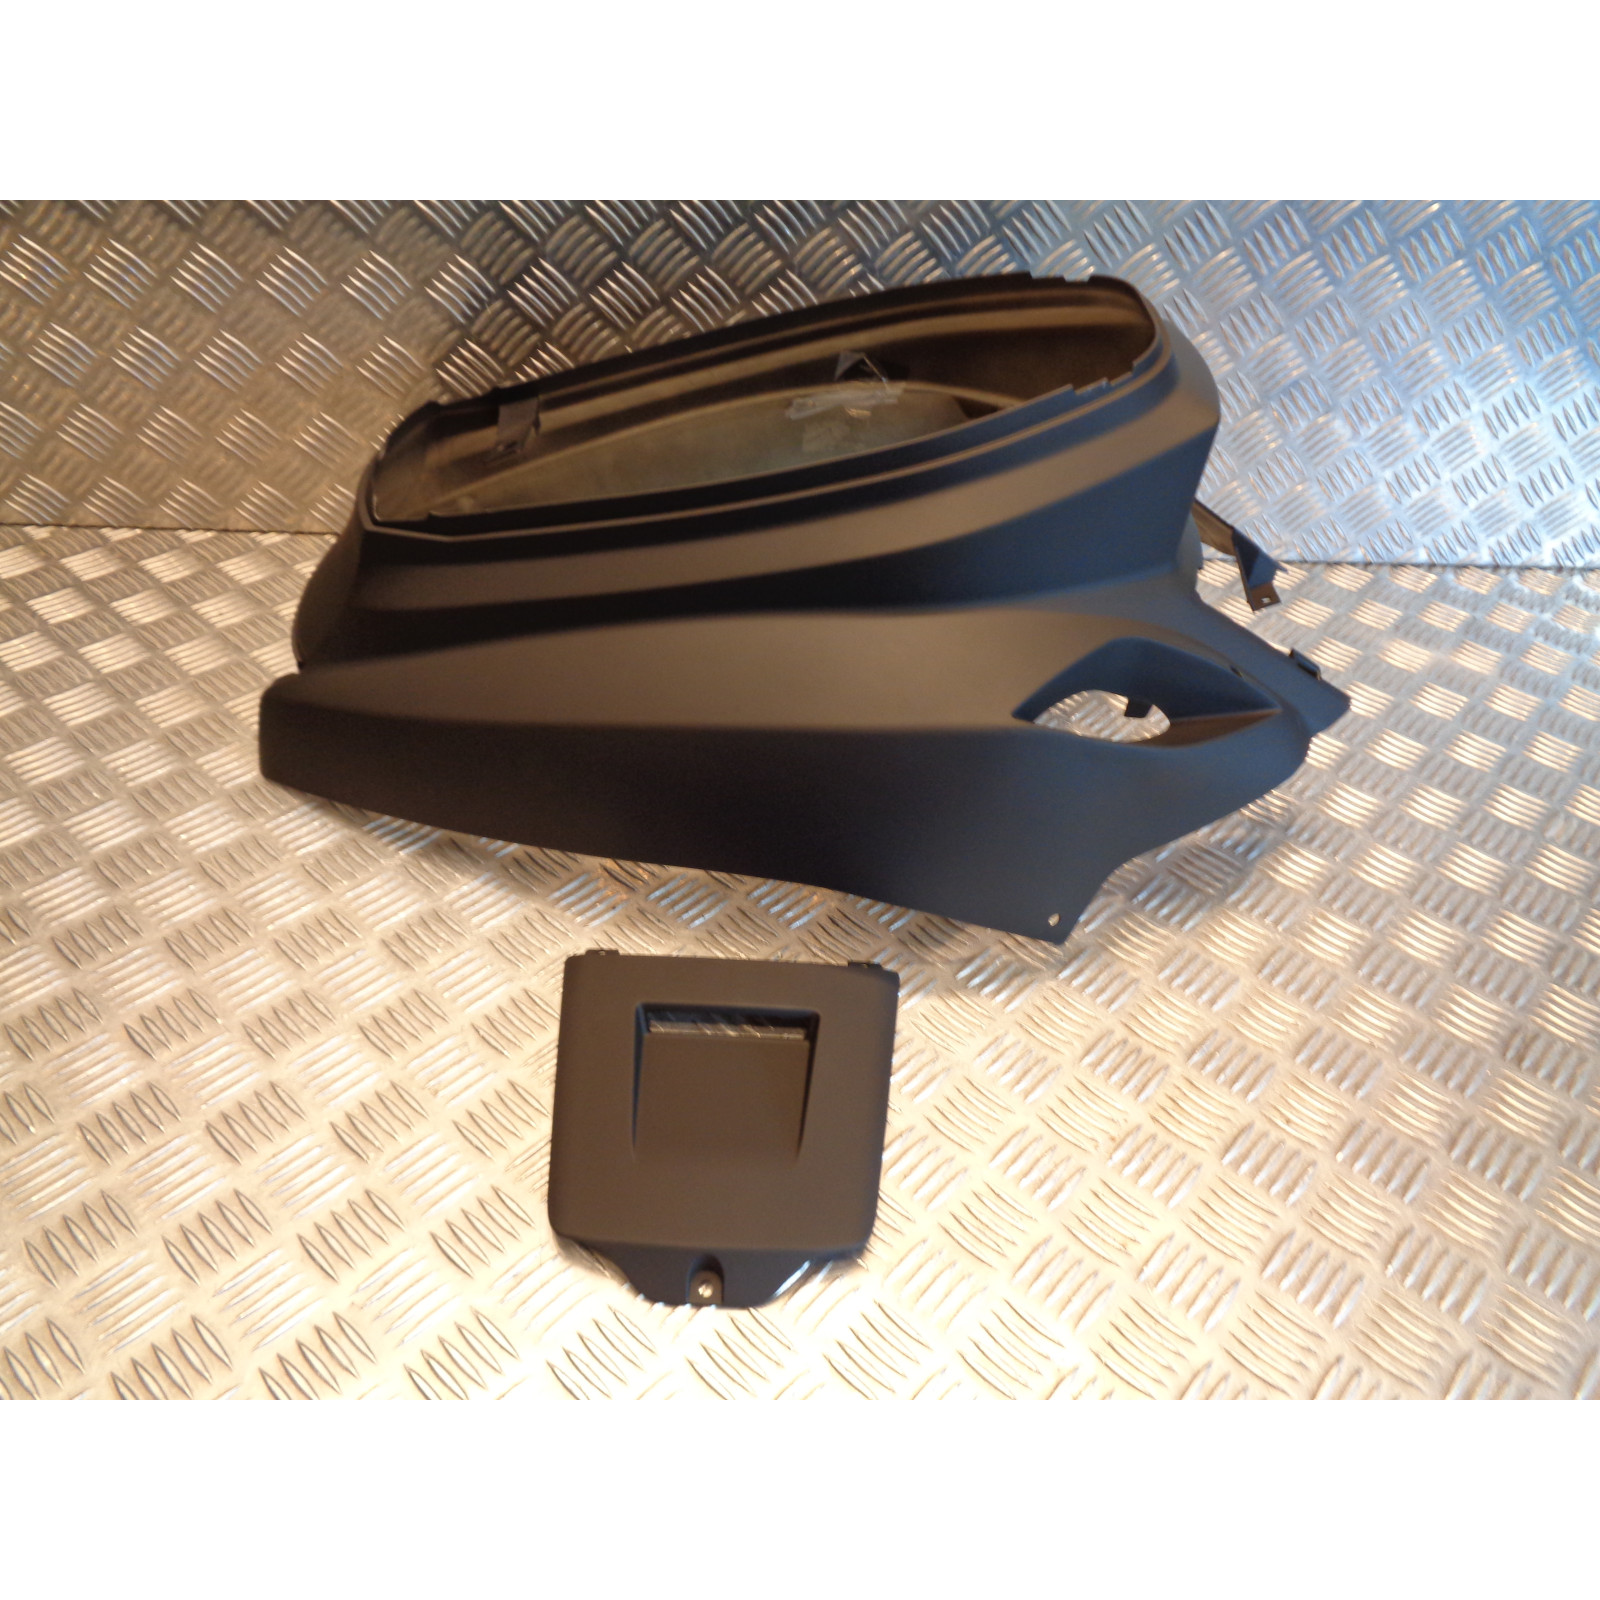 cache coque arriere + trappe replay design scooter mbk 50 booster apres 2004 noir Mat